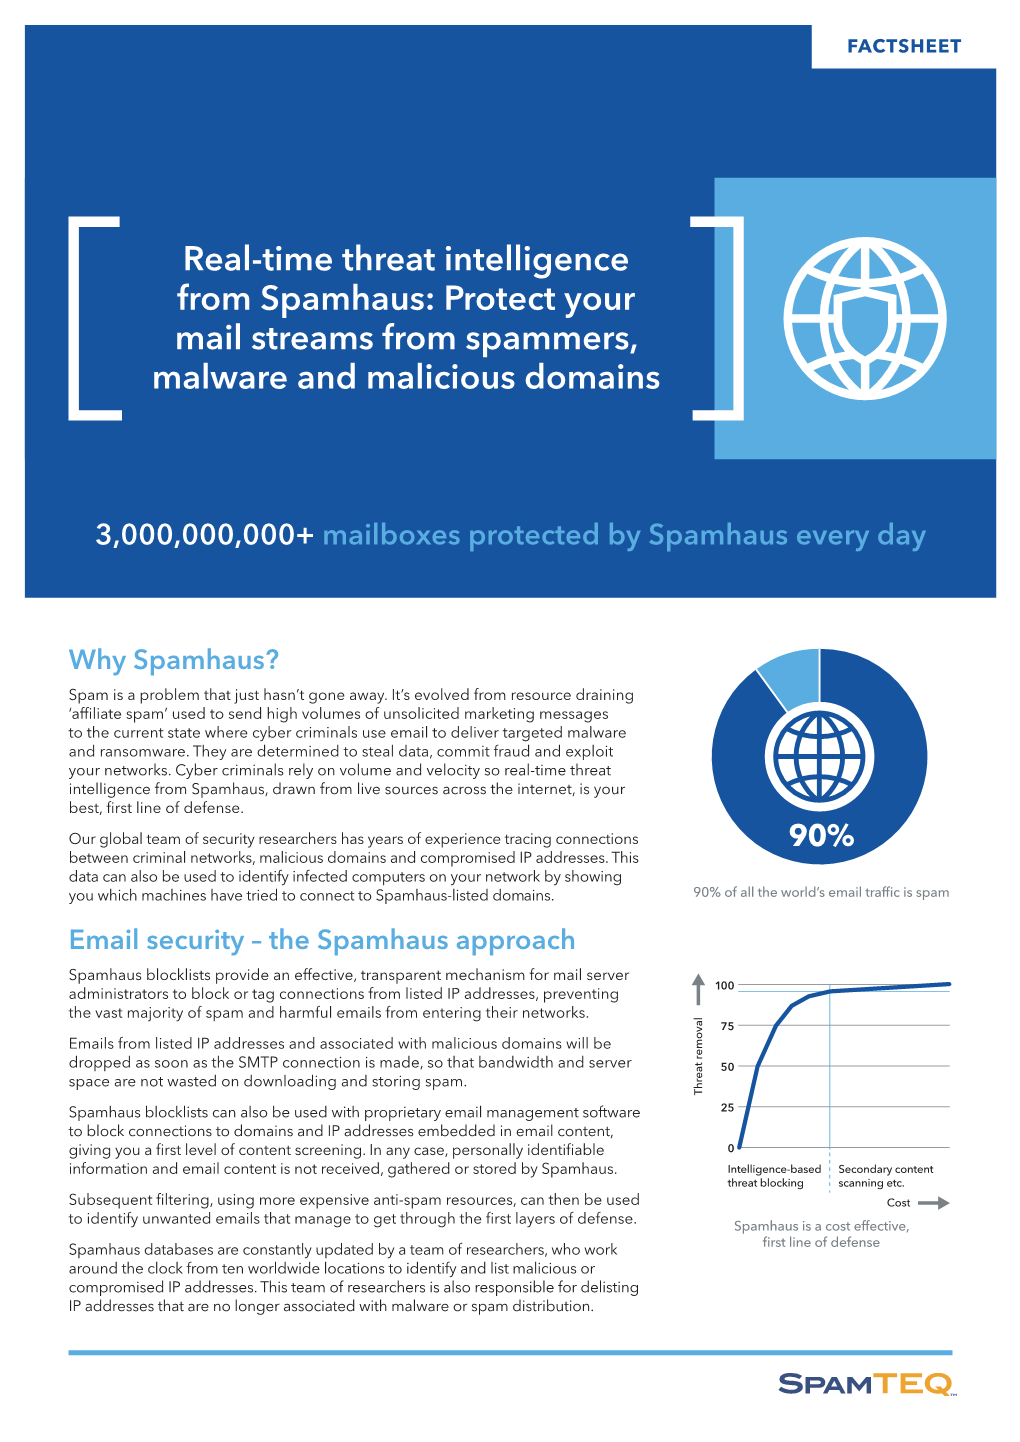 Real-Time Threat Intelligence from Spamhaus: Protect Your Mail Streams from Spammers, Malware and Malicious Domains